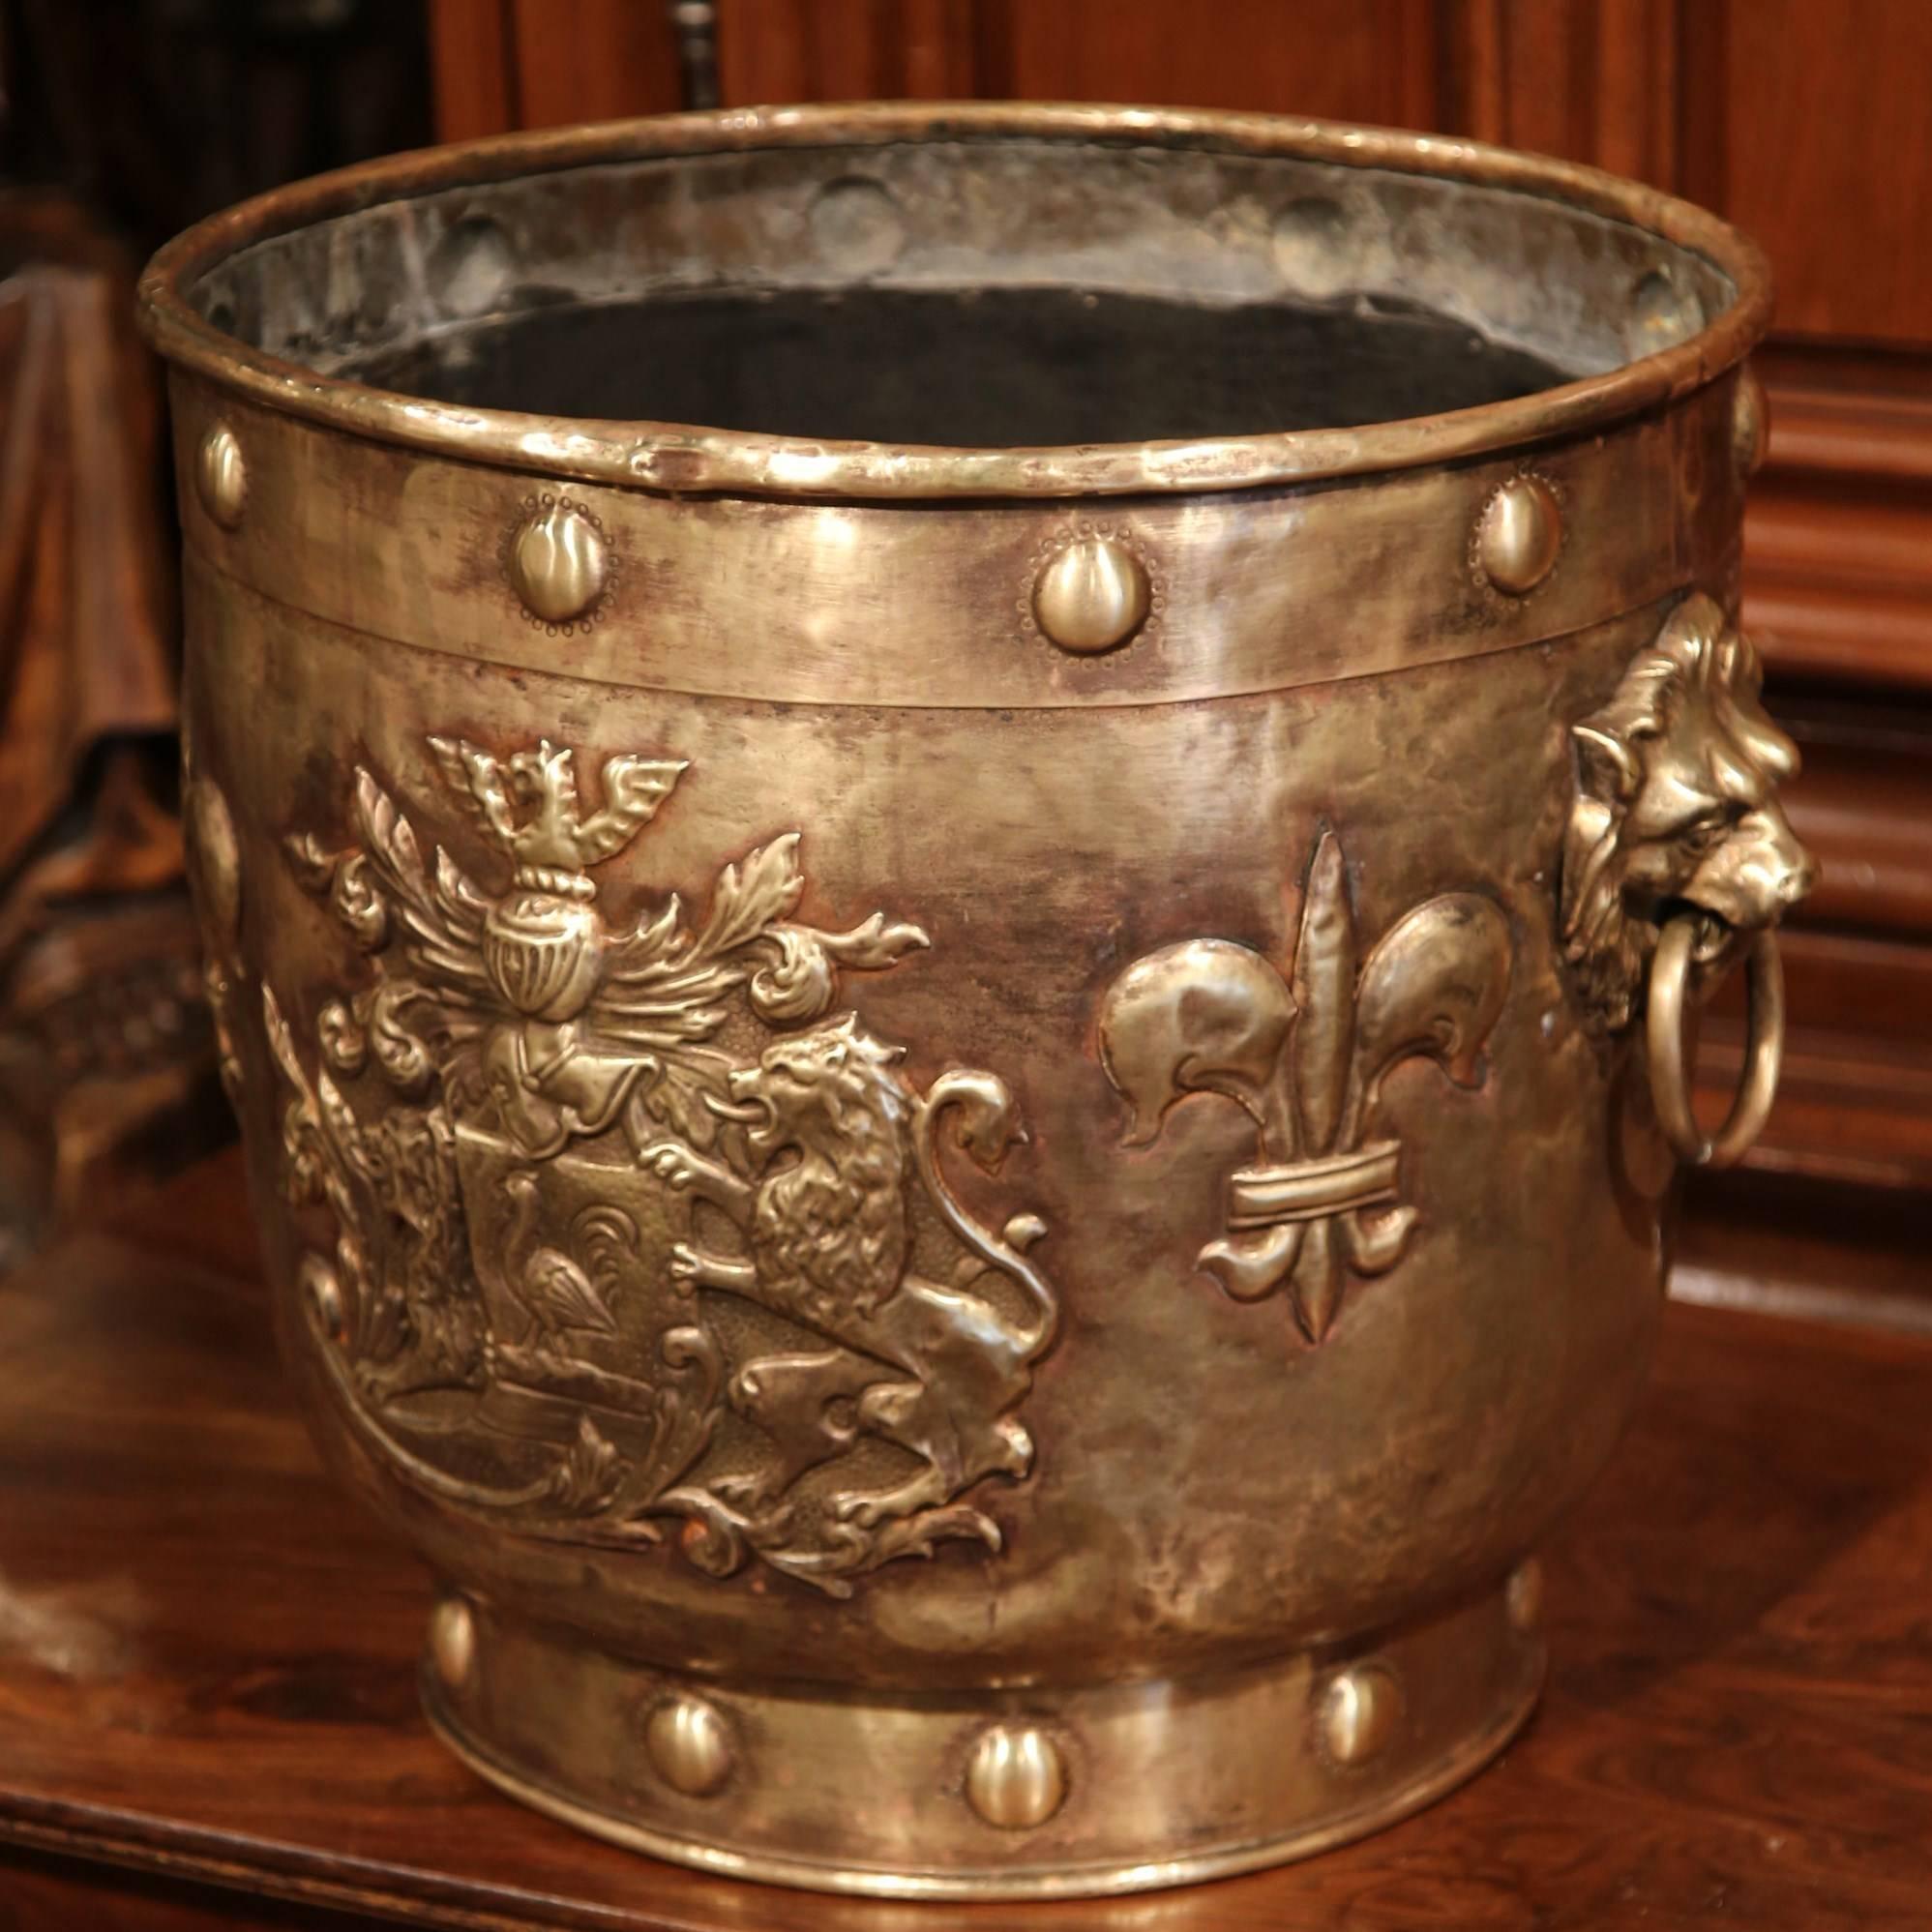 This large, antique jardiniere was crafted in Southern France, circa 1870. The brass planter has two lion head handles, and repousse relief decor around the sides. The motifs include Classic themes such as fleur-de-lys, coat of arms and fruit